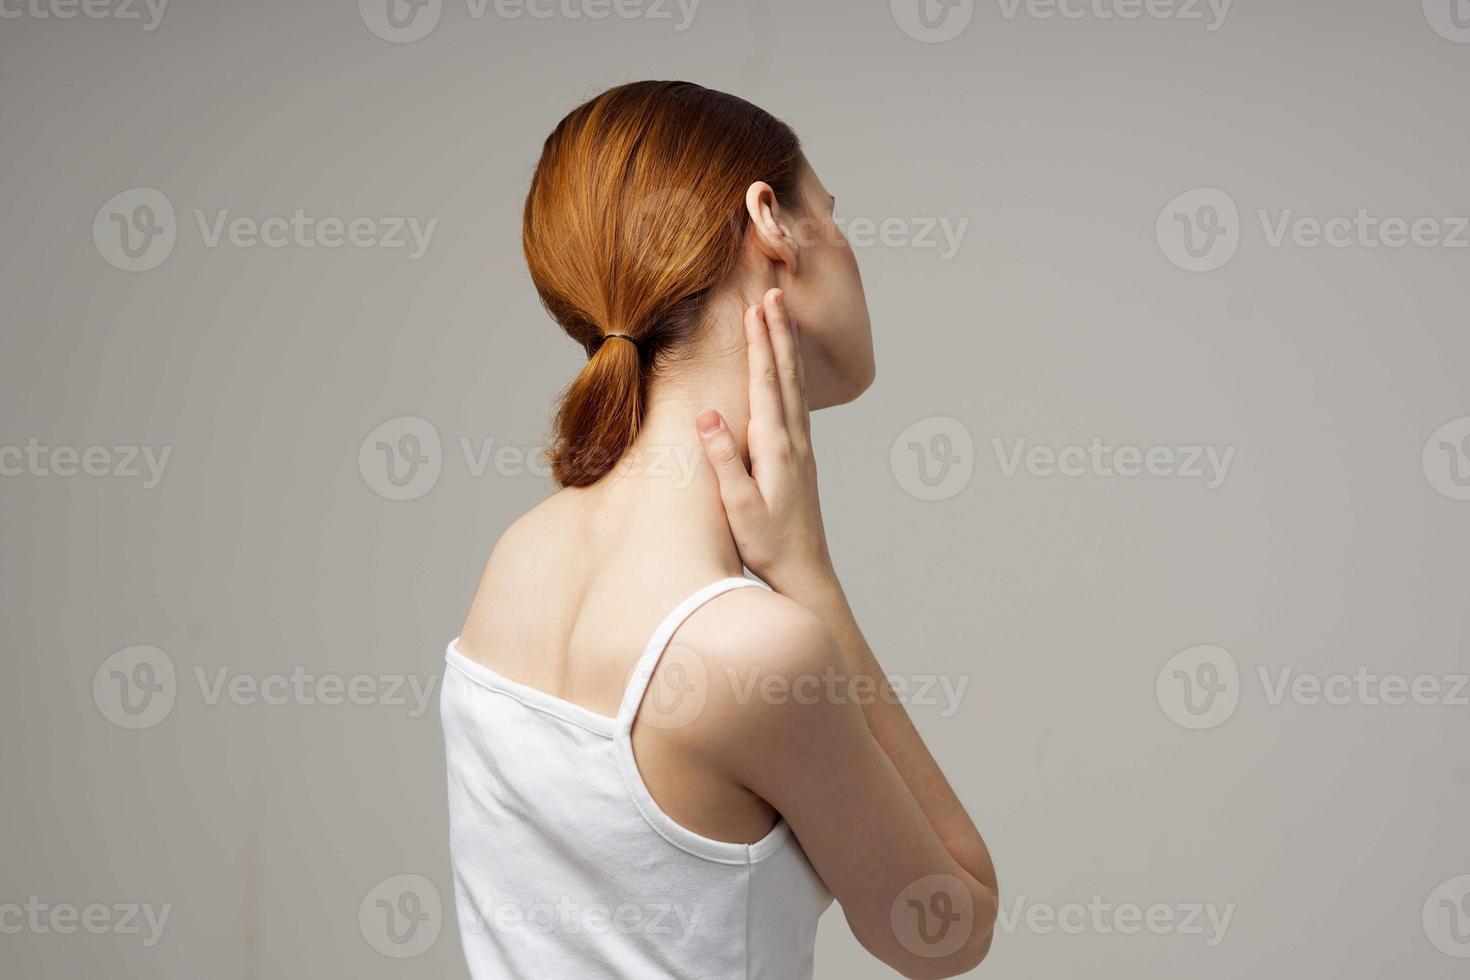 woman in white t-shirt holding on to the neck health problems joint light background photo